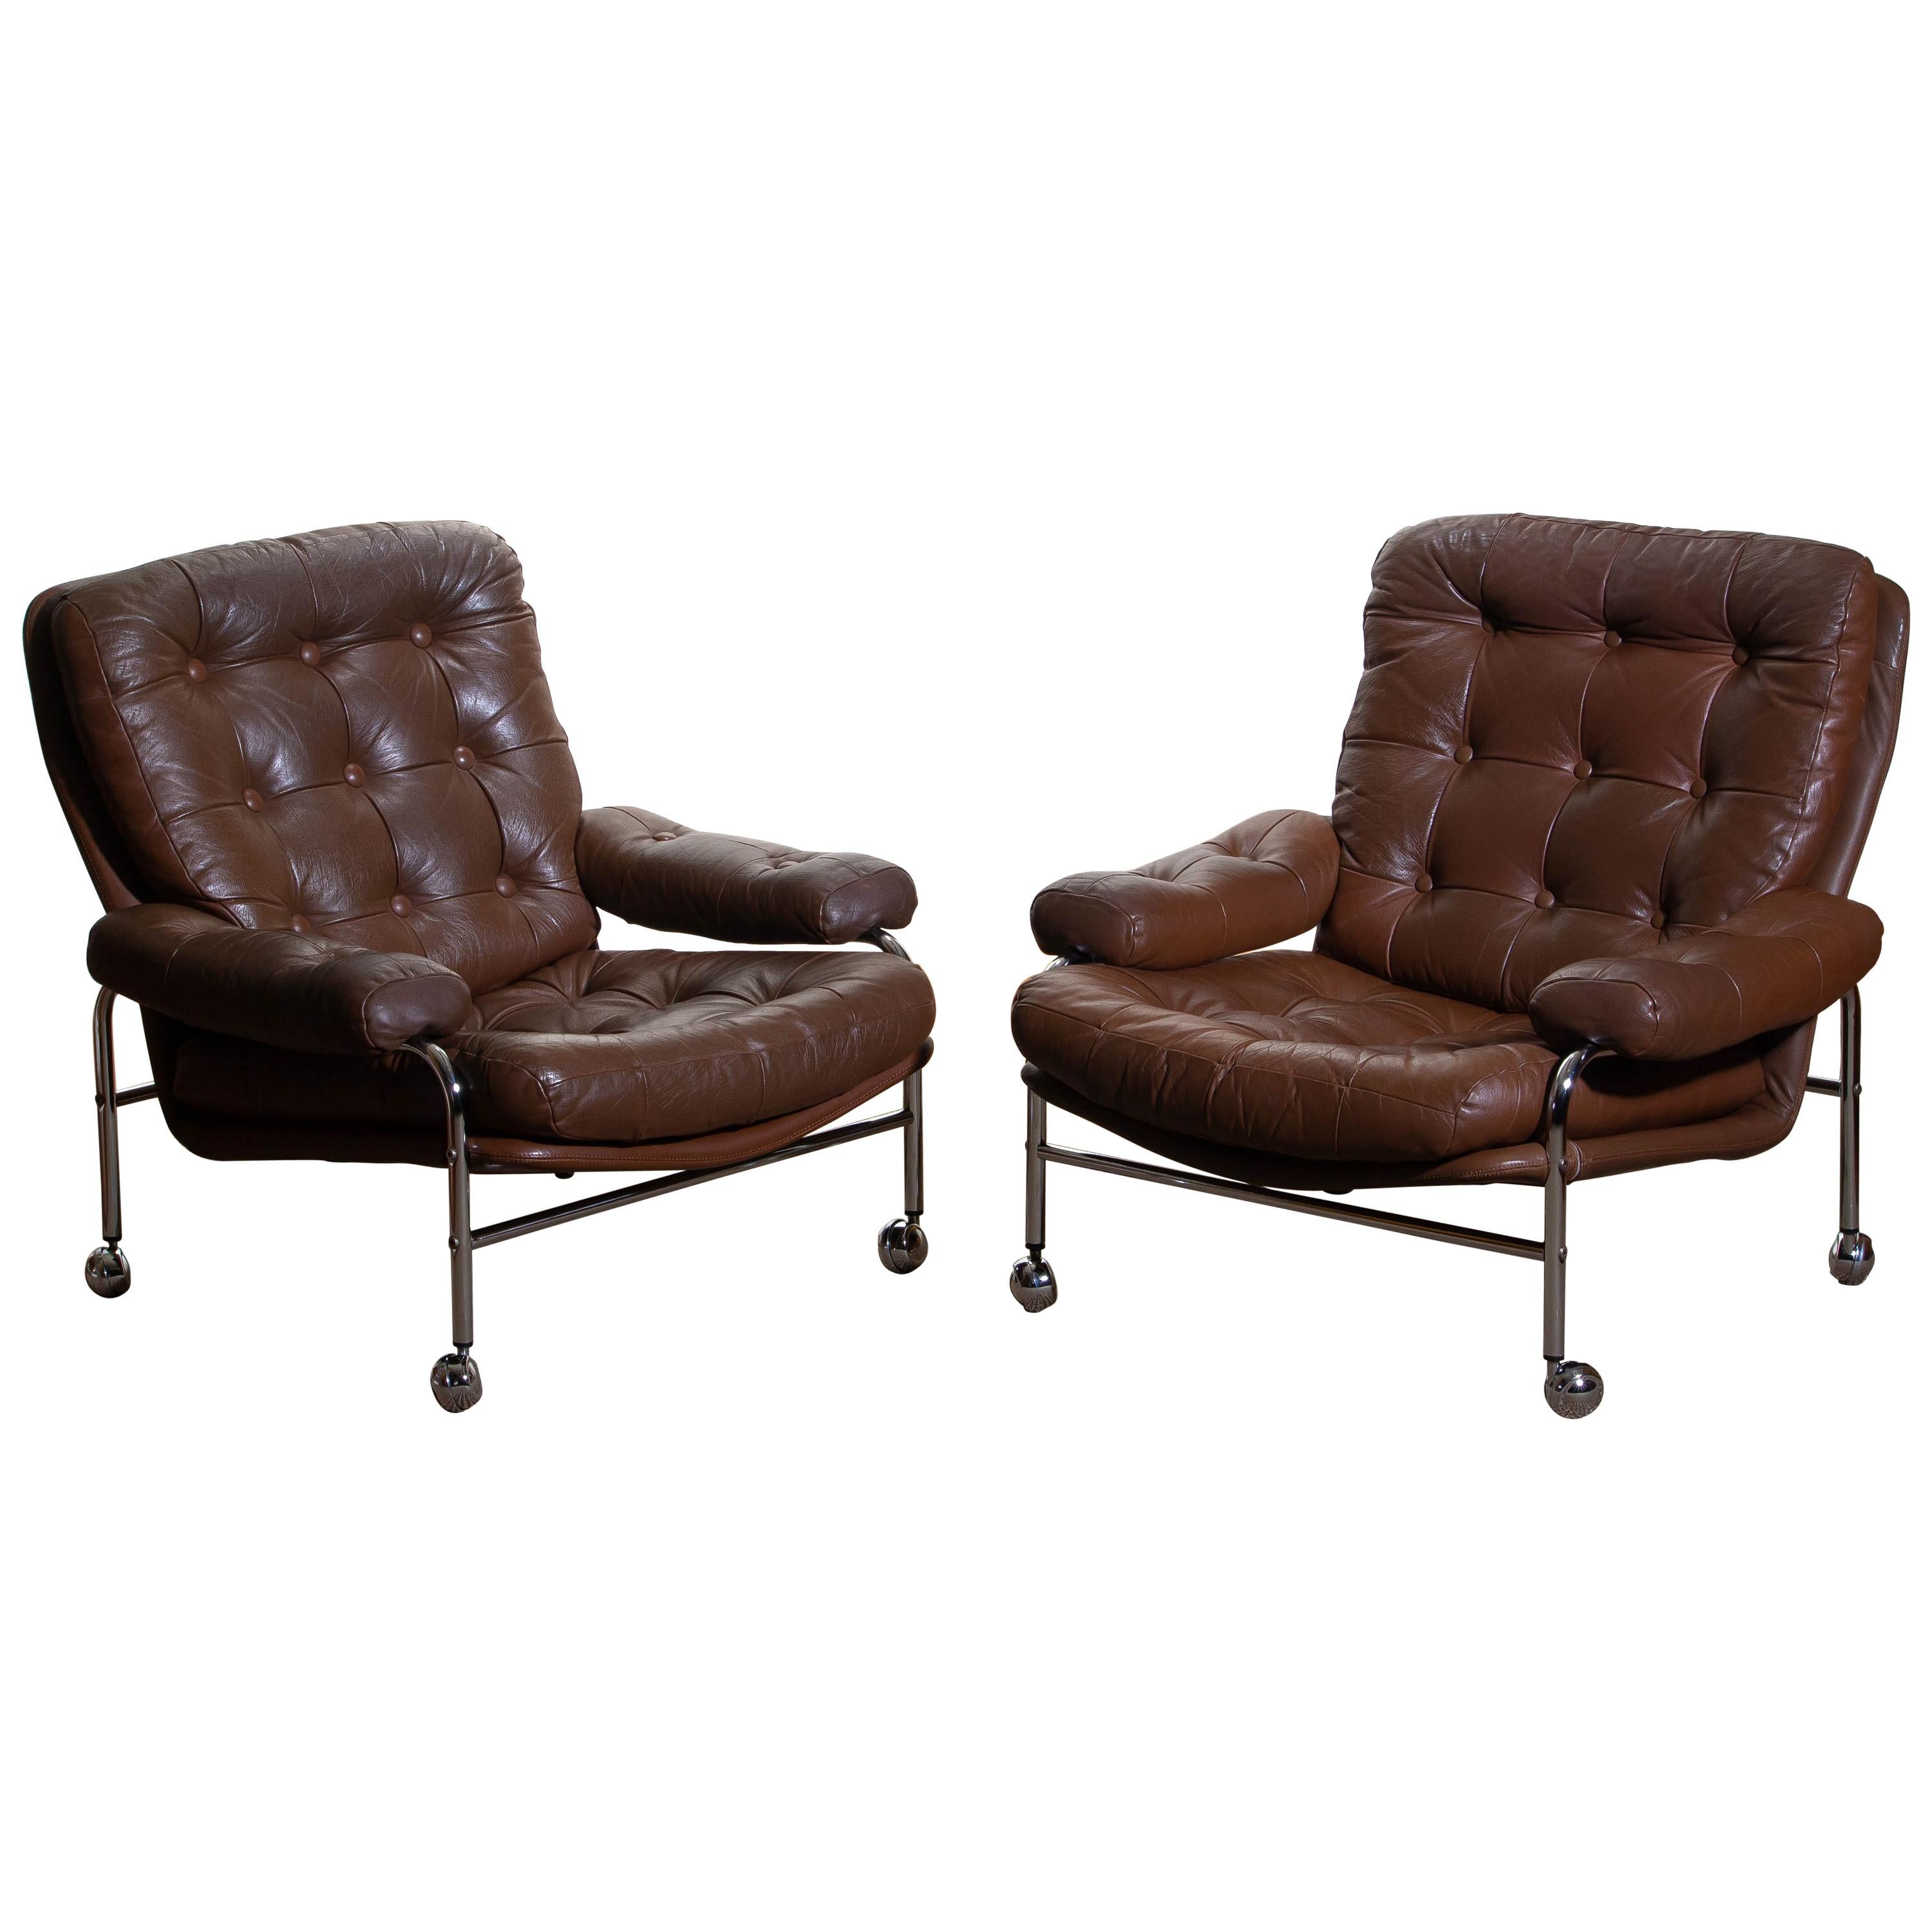 1970s, Chrome and Brown Leather Lounge Chairs by Scapa Rydaholm, Sweden 1